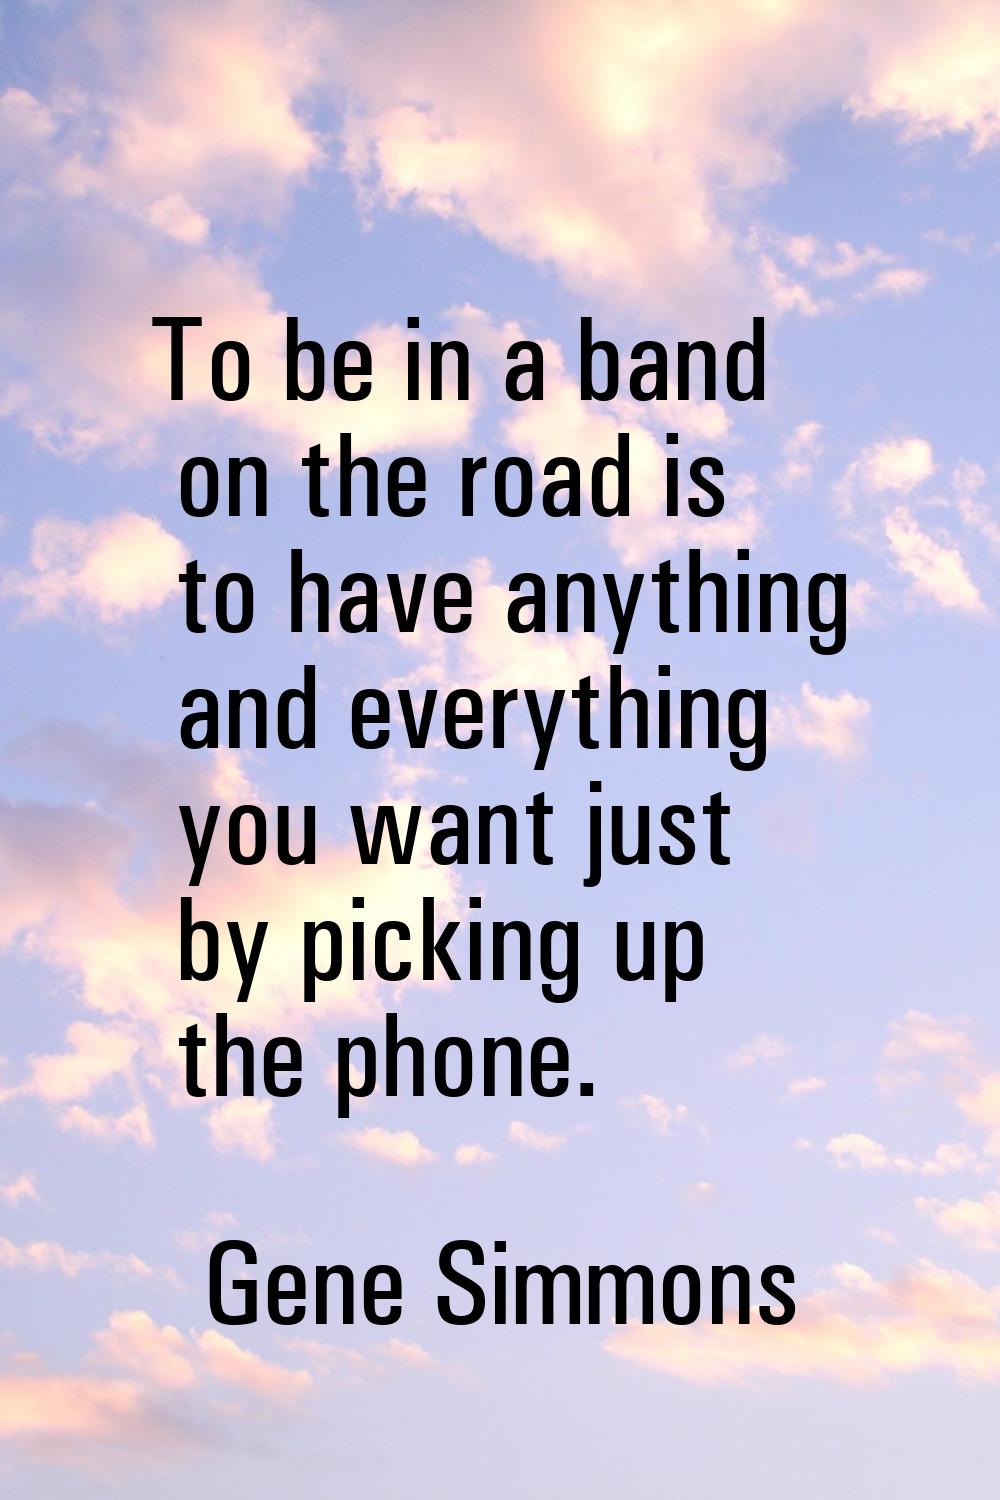 To be in a band on the road is to have anything and everything you want just by picking up the phon